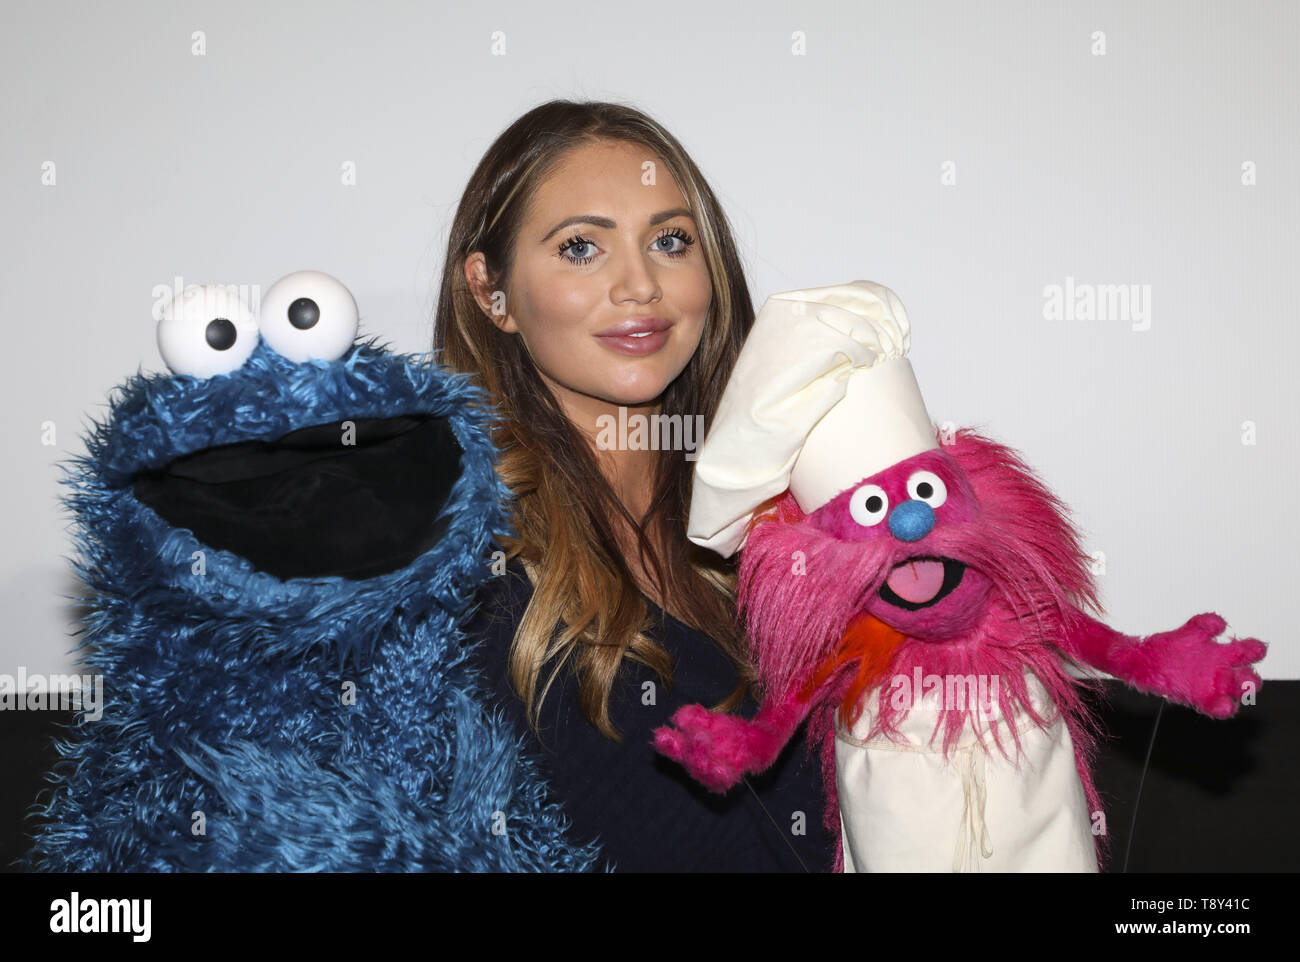 TV personality Amy Childs and her daughter Polly attend 'Cookie Monster’s Foodie Truck' Tiny Pop TV show  Featuring: Amy Childs, Cookie Monster, Gonger Where: London, United Kingdom When: 14 Apr 2019 Credit: Jed Leicester/PinPep/WENN.com Stock Photo